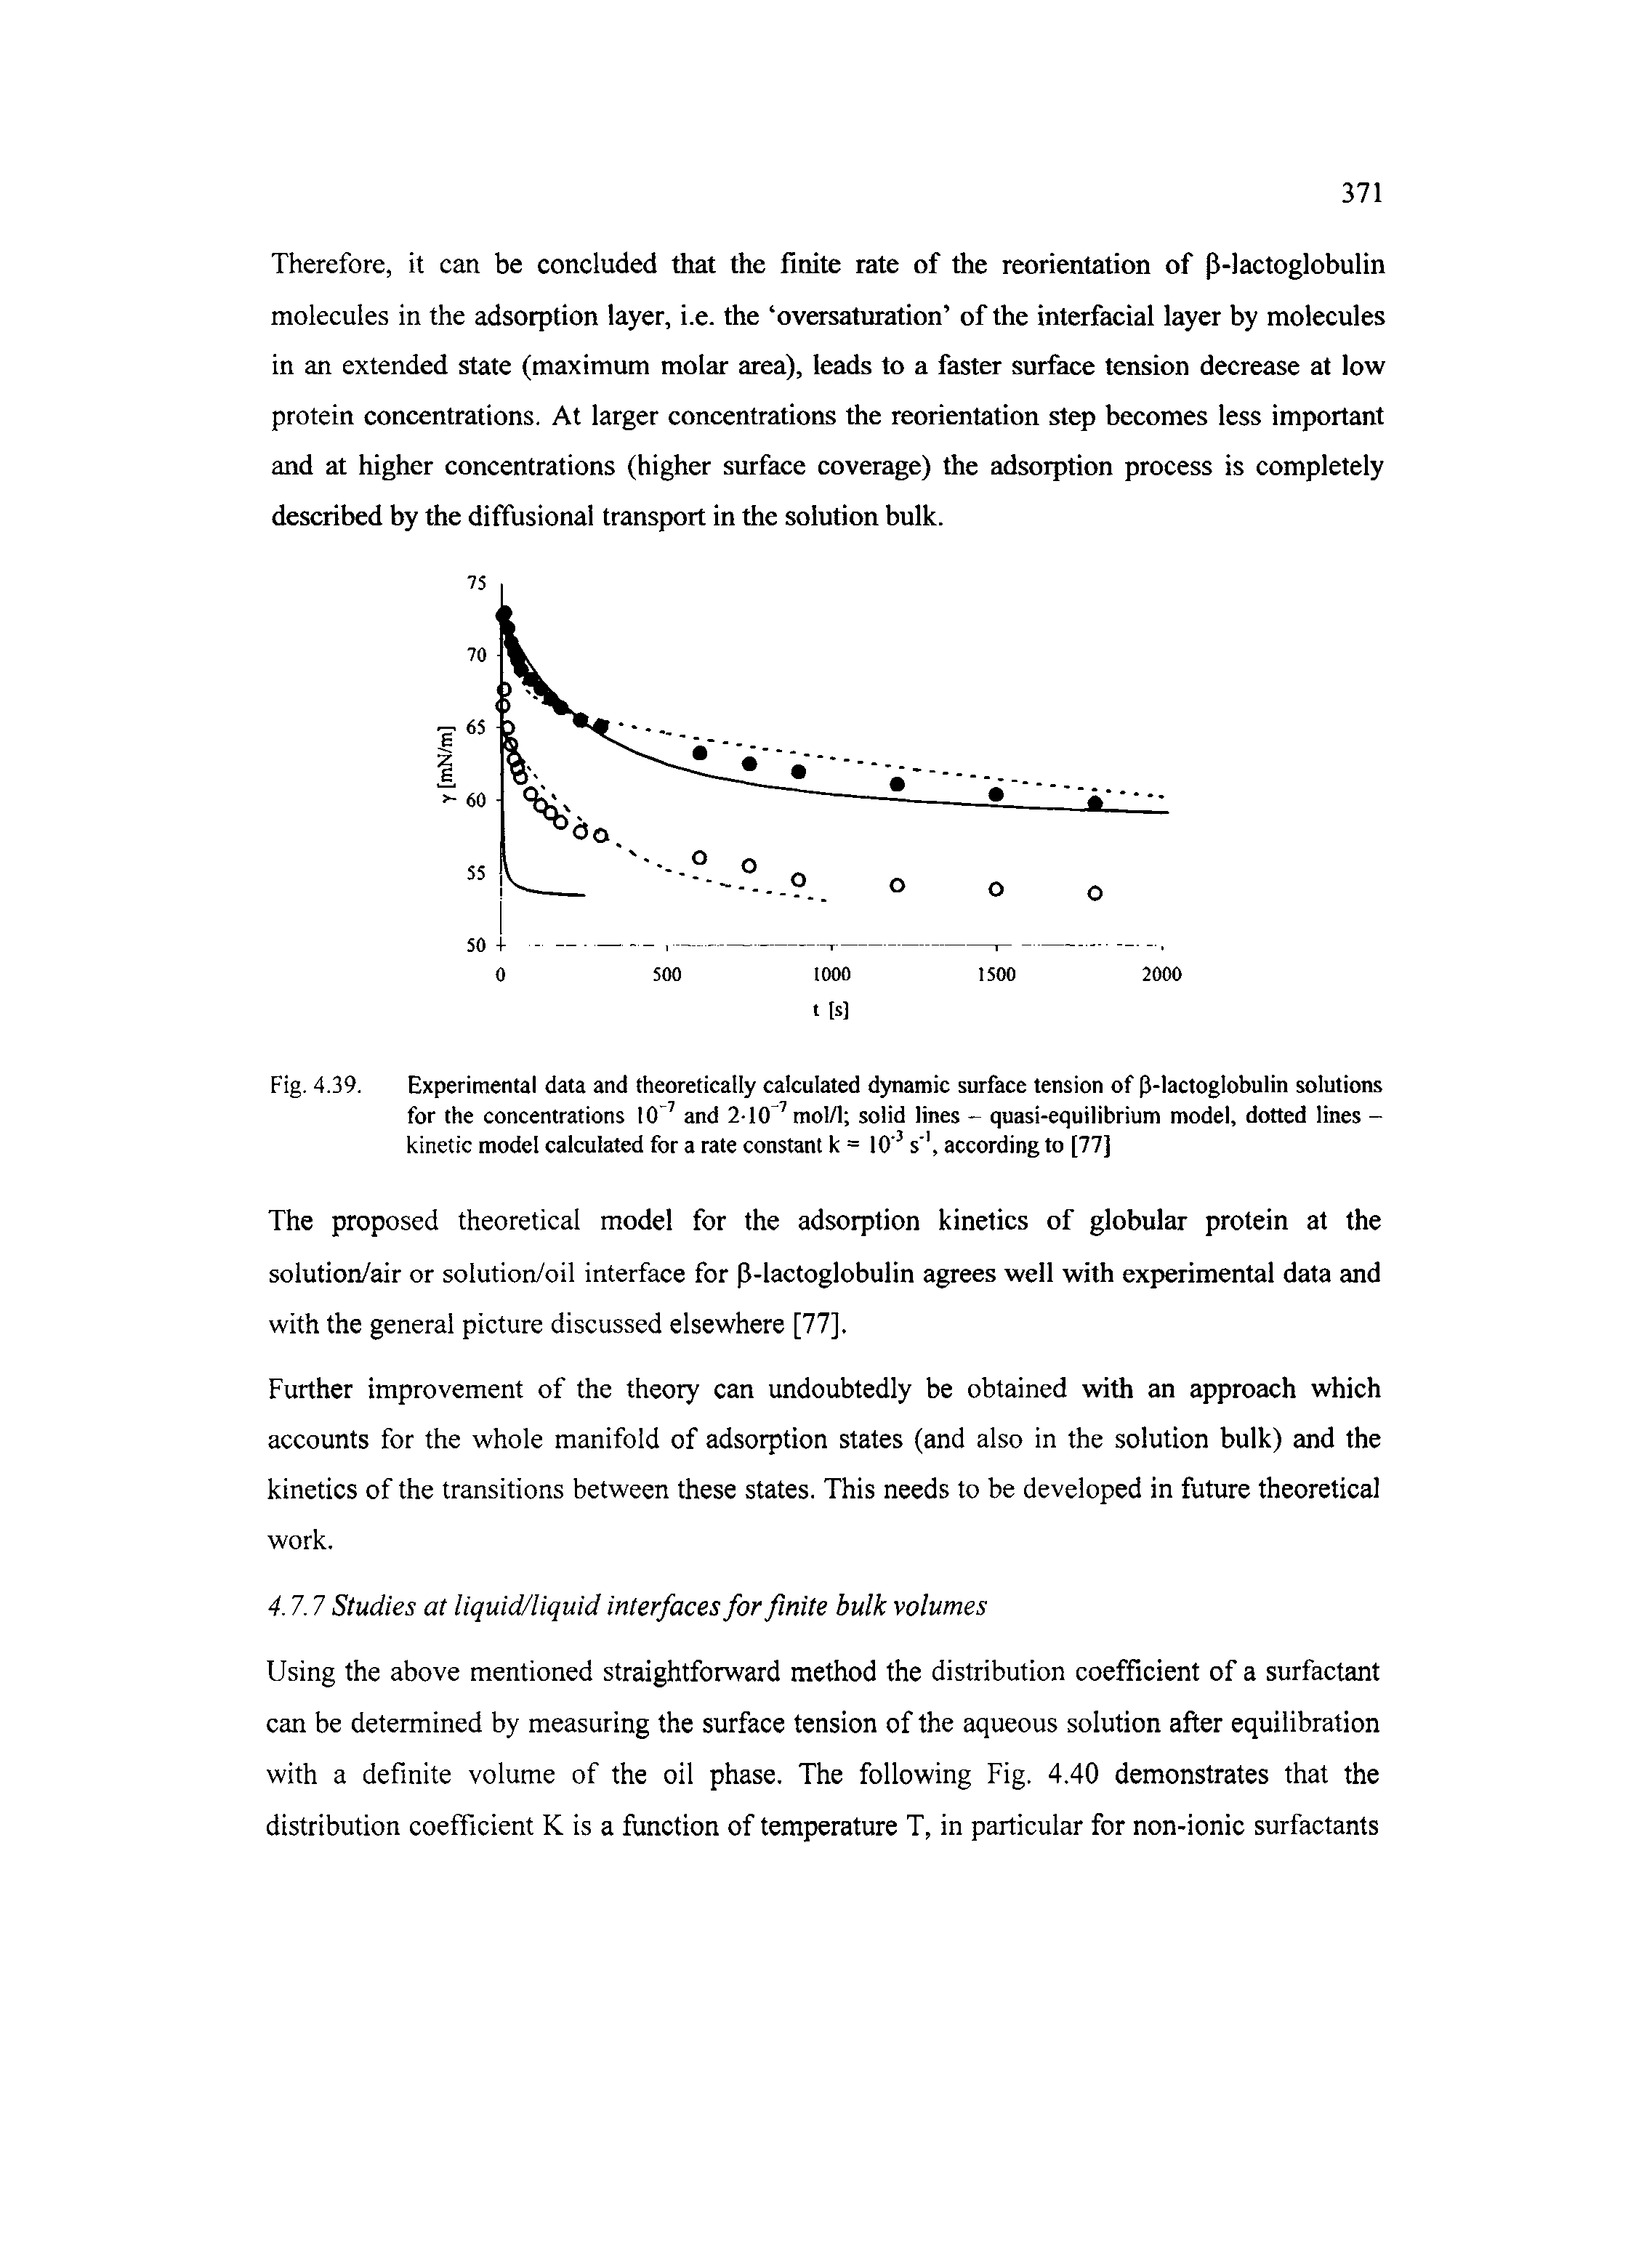 Fig. 4.39. Experimental data and theoretically calculated dynamic surface tension of P-lactoglobulin solutions for the concentrations 10" and 210 mol/l solid lines - quasi-equilibrium model, dotted lines -kinetic model calculated for a rate constant k = 10 s, according to [77]...